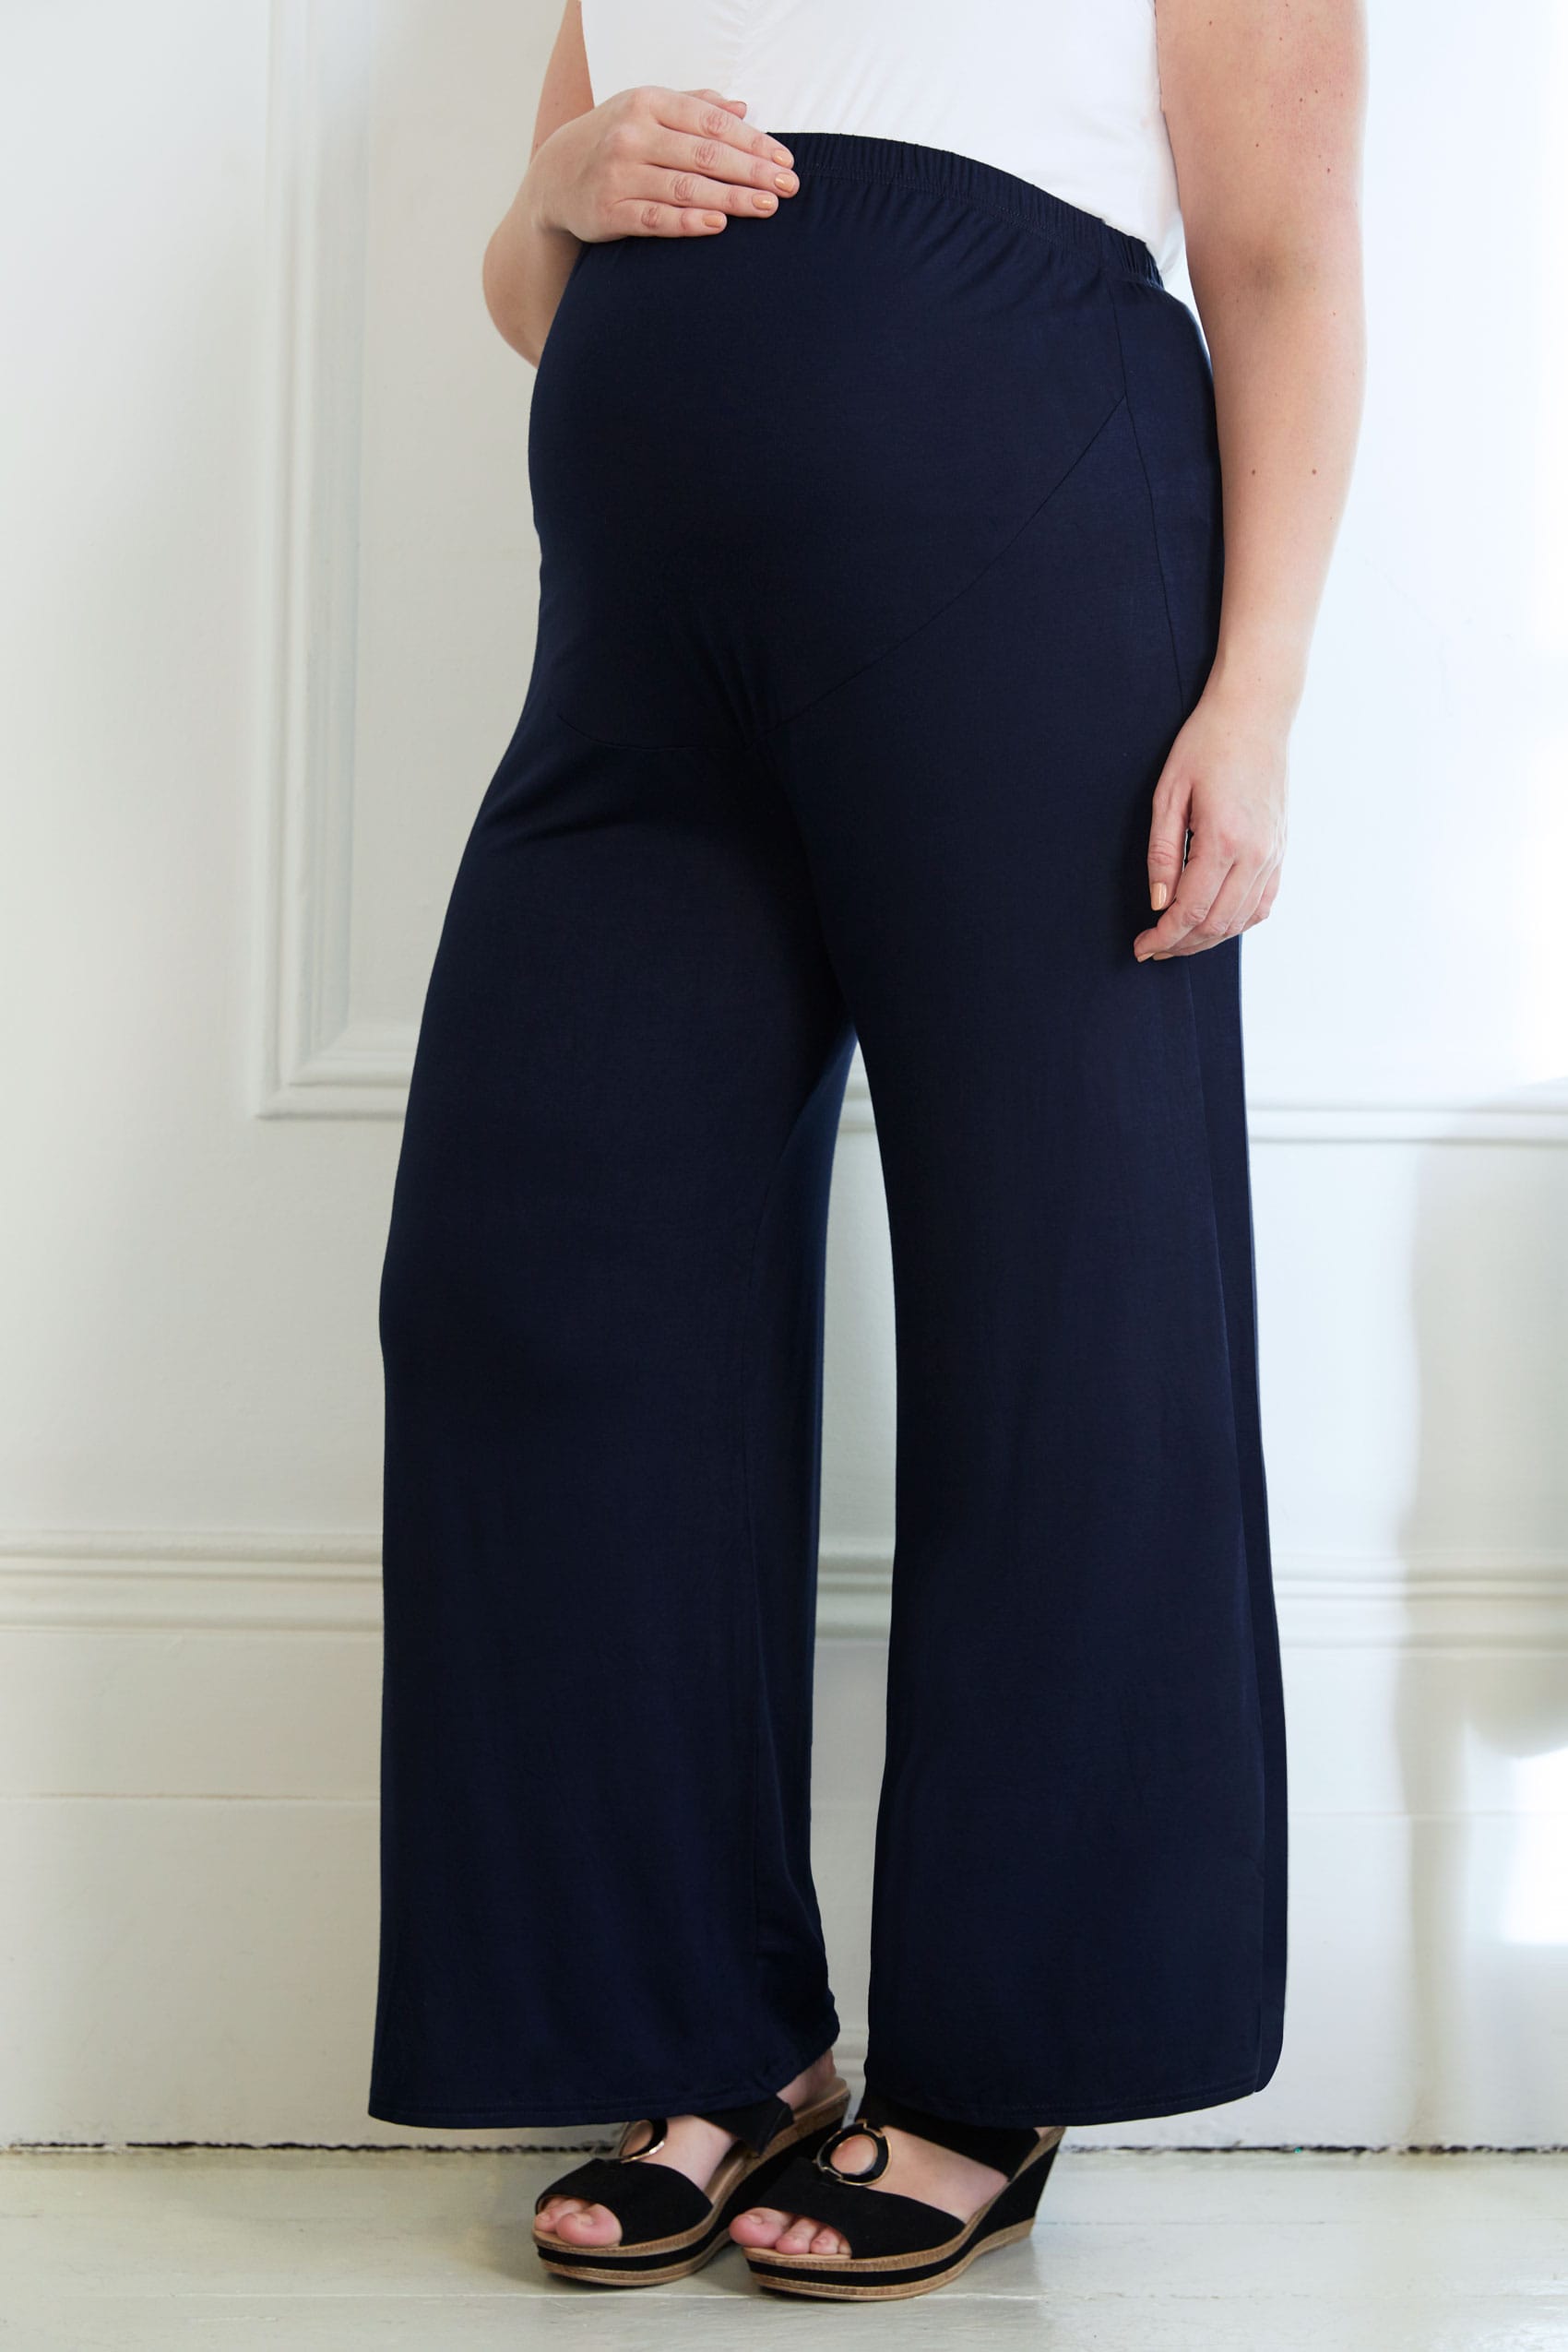 Yours Clothing Womens Bump IT UP Maternity Palazzo Trousers with Comfort Panel